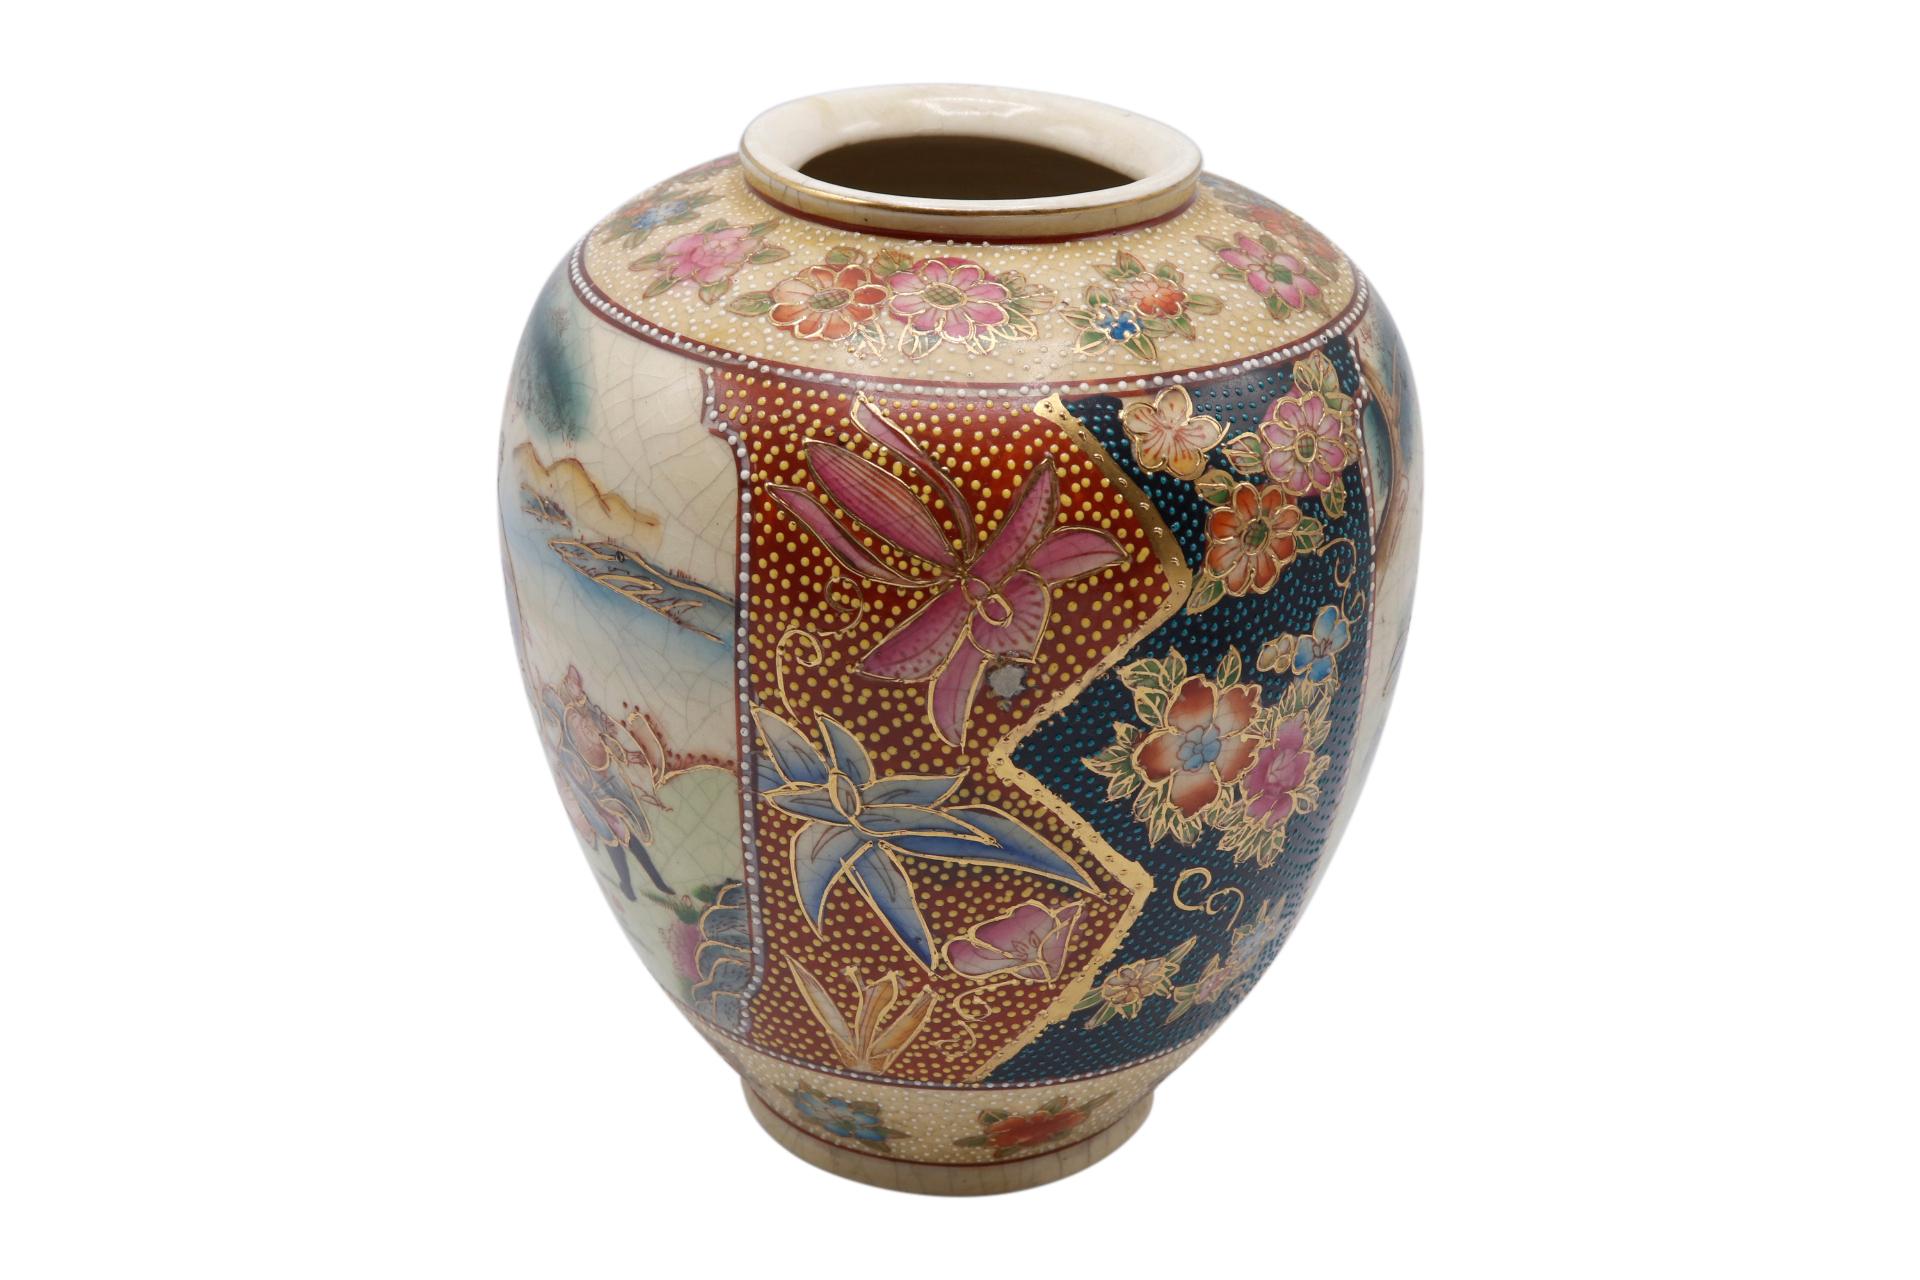 A hand painted ceramic Chinese vase. Both sides show the same scene, a Yuenü or swordswoman on horseback. Framed with blossom outlined in gold surround with gold dots. Marked underneath “Made in China”.